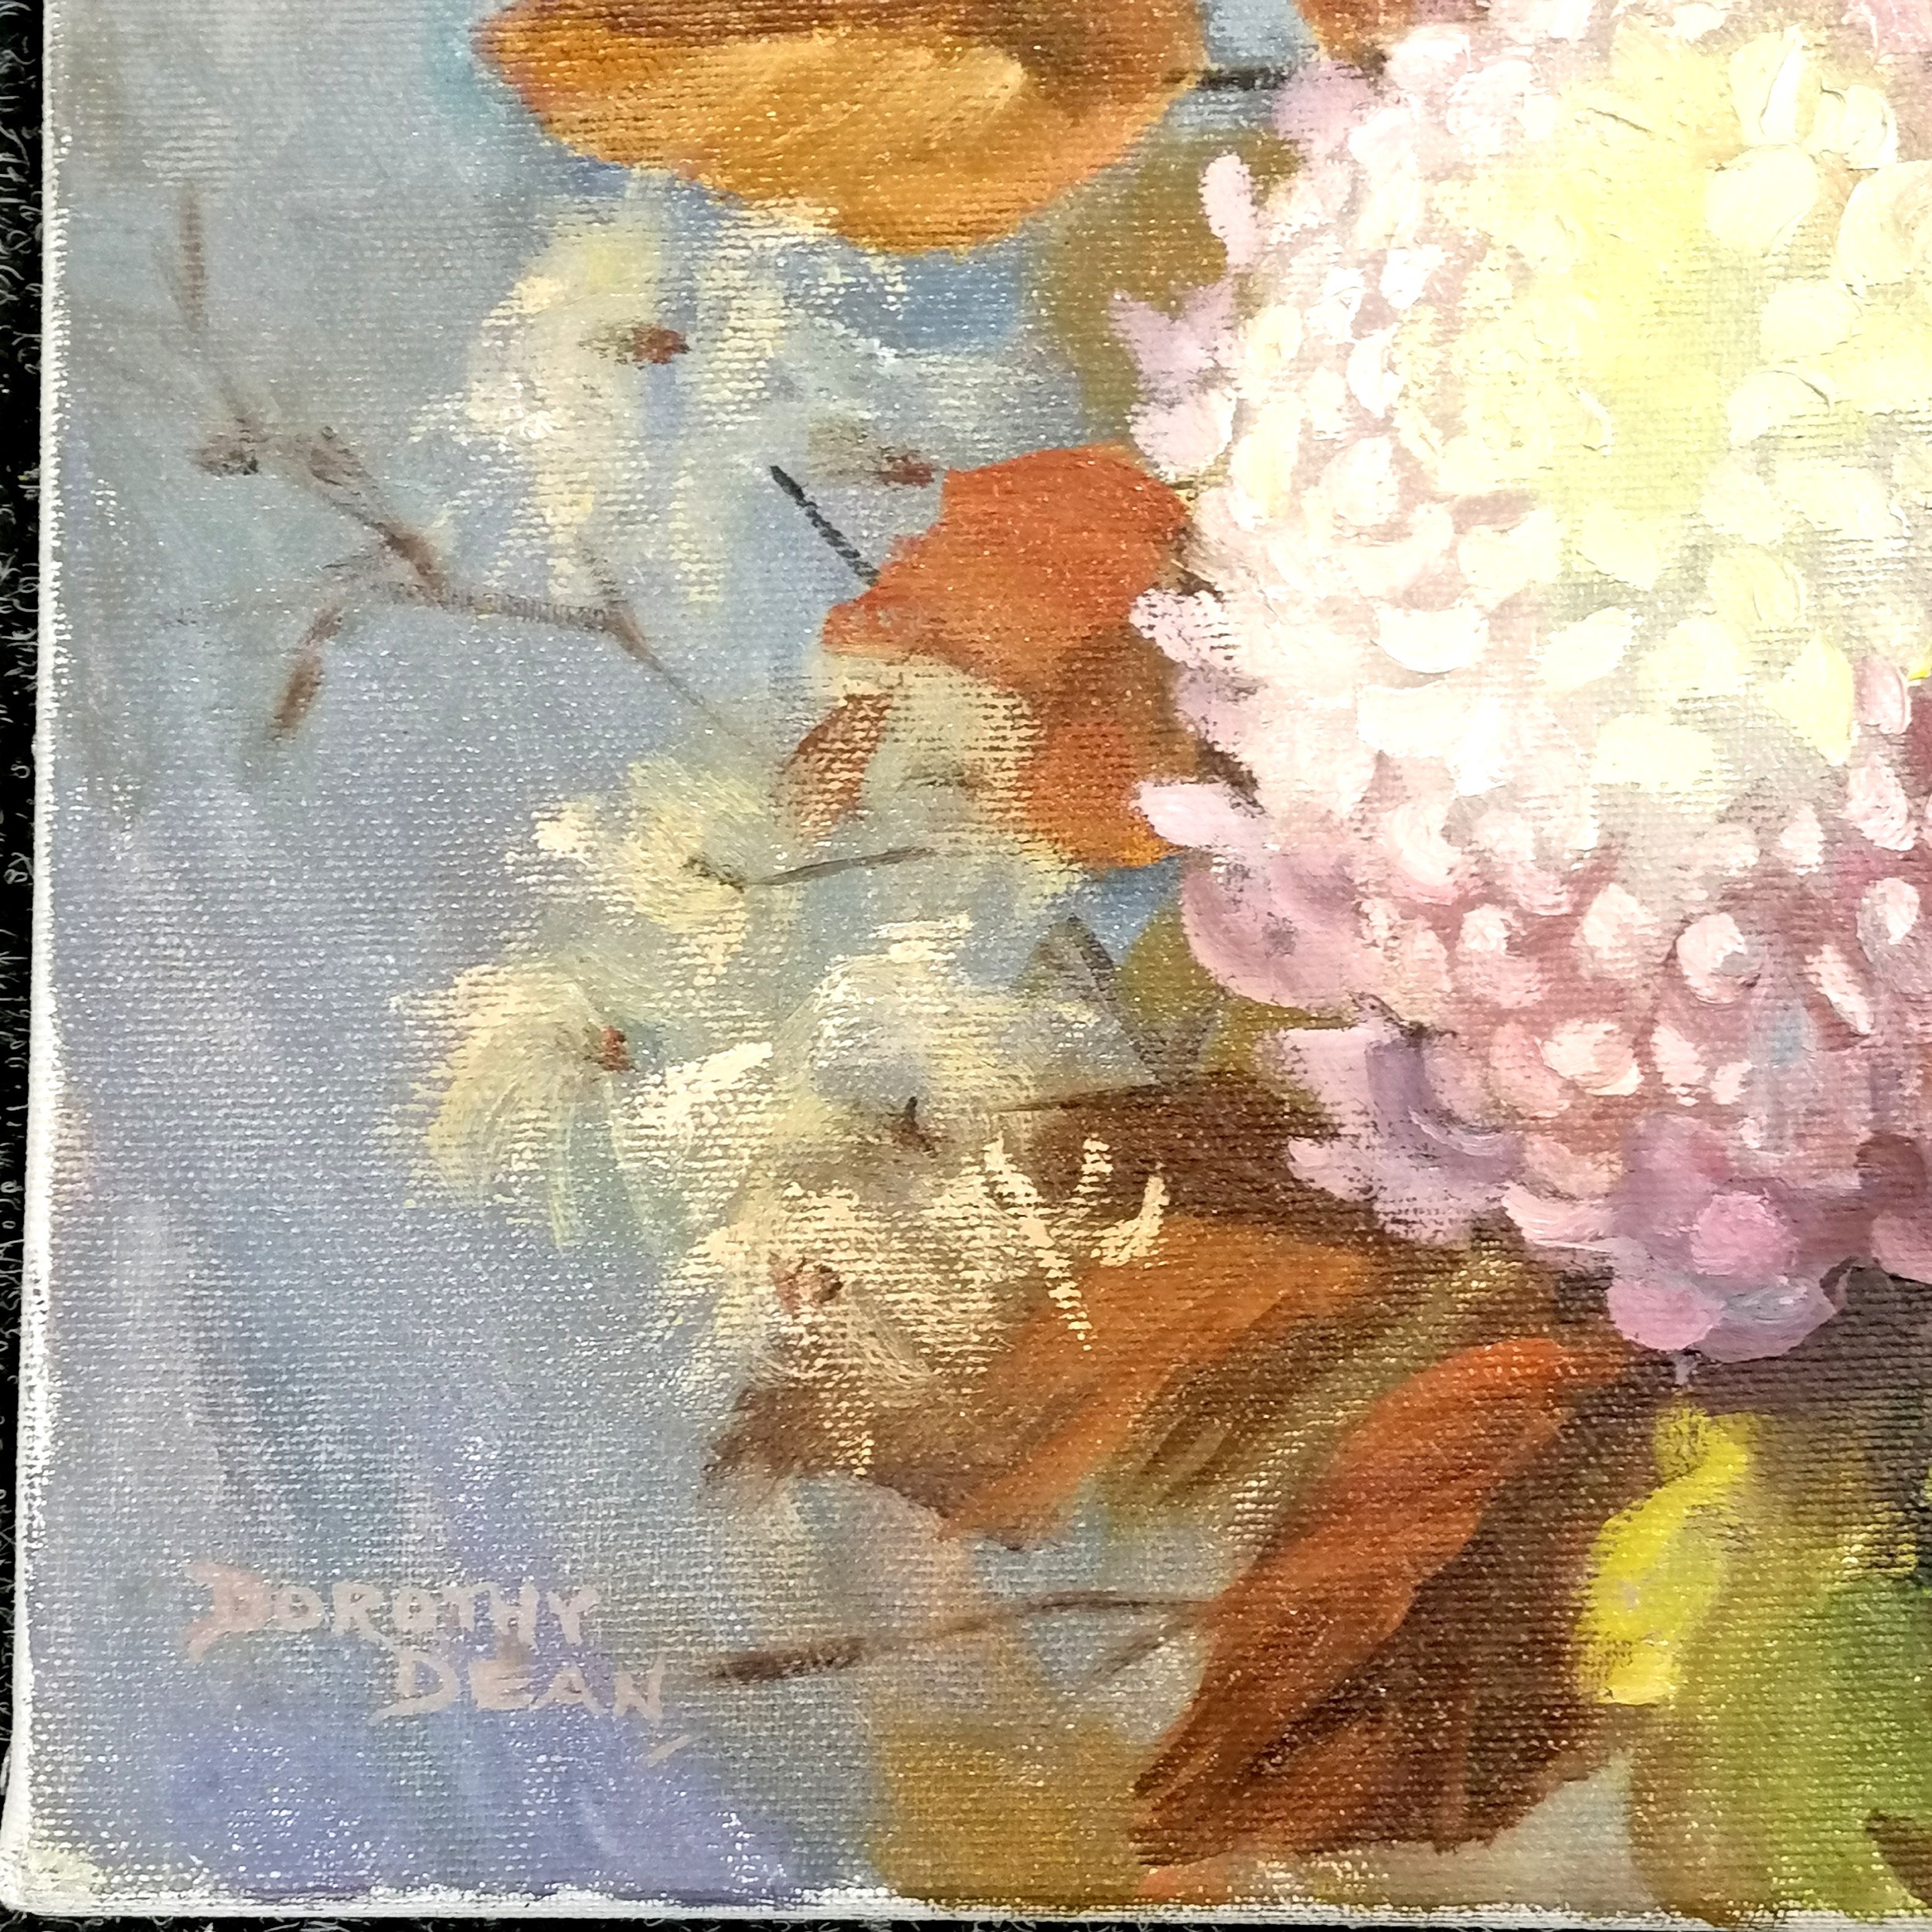 Oil painting on canvas of some flowers by Dorothy Dean (1920-2005) - 45.5cm x 36cm - Image 2 of 2